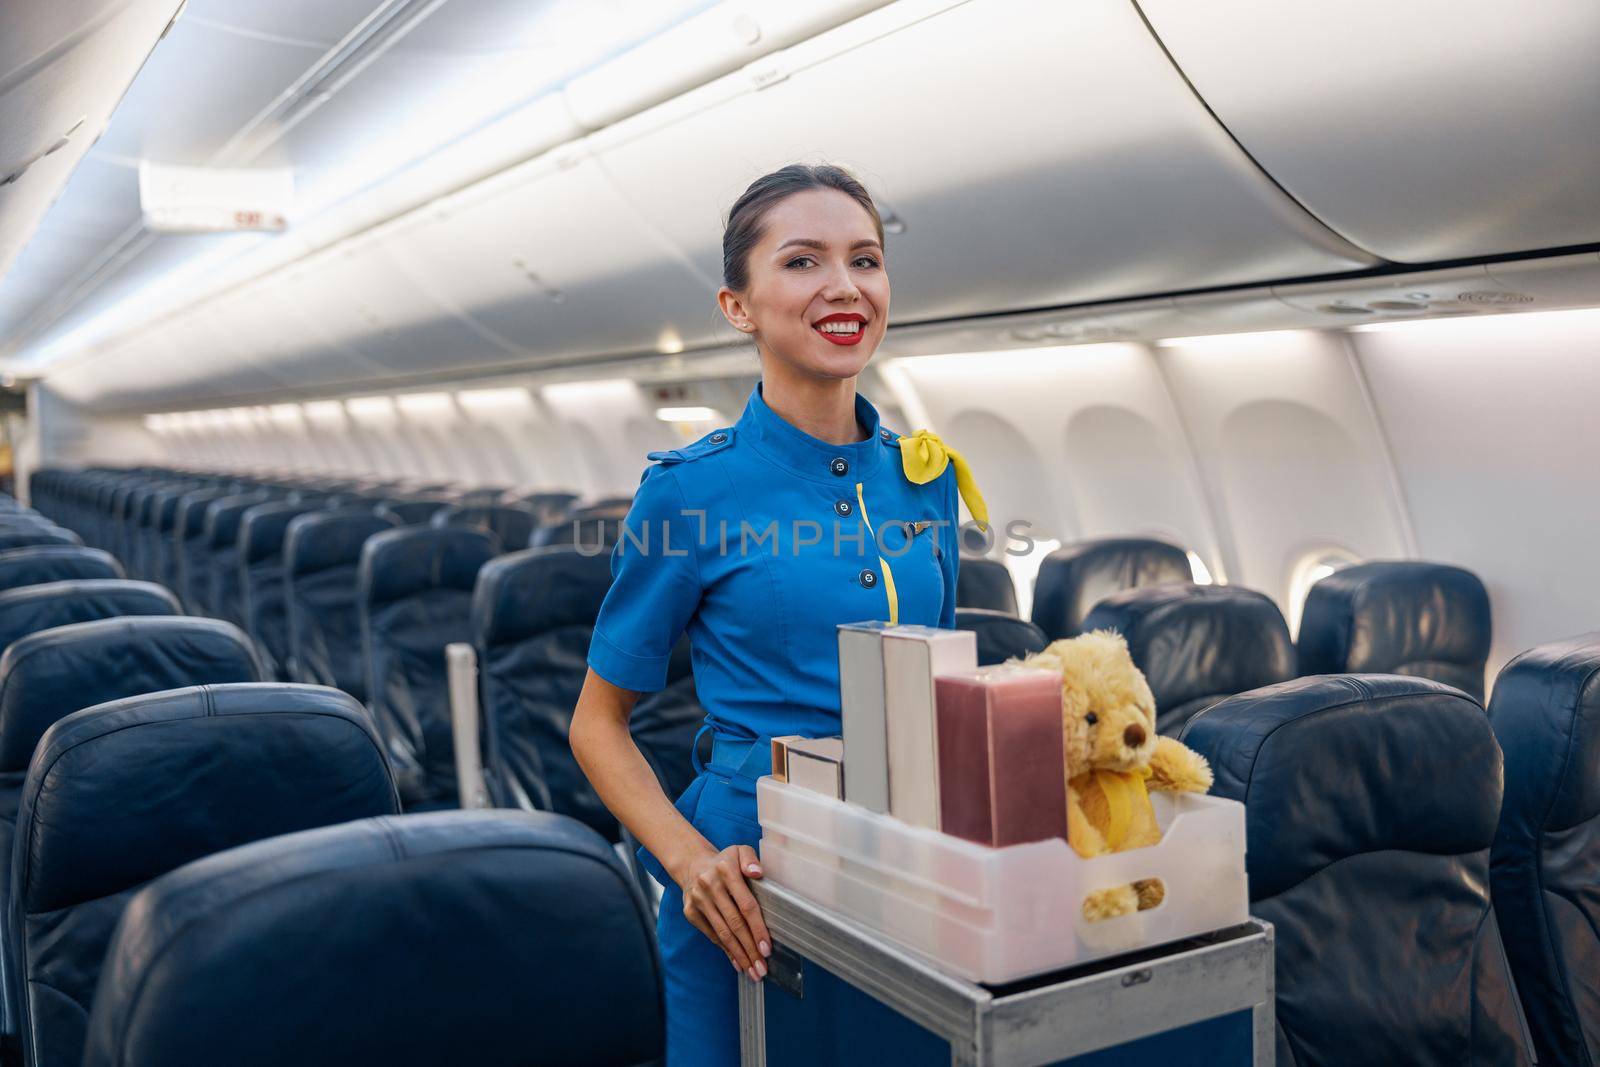 Cheerful female air hostess in bright blue uniform smiling at camera while leading trolley cart with gifts through empty plane aisle. Travel, service, transportation, airplane concept